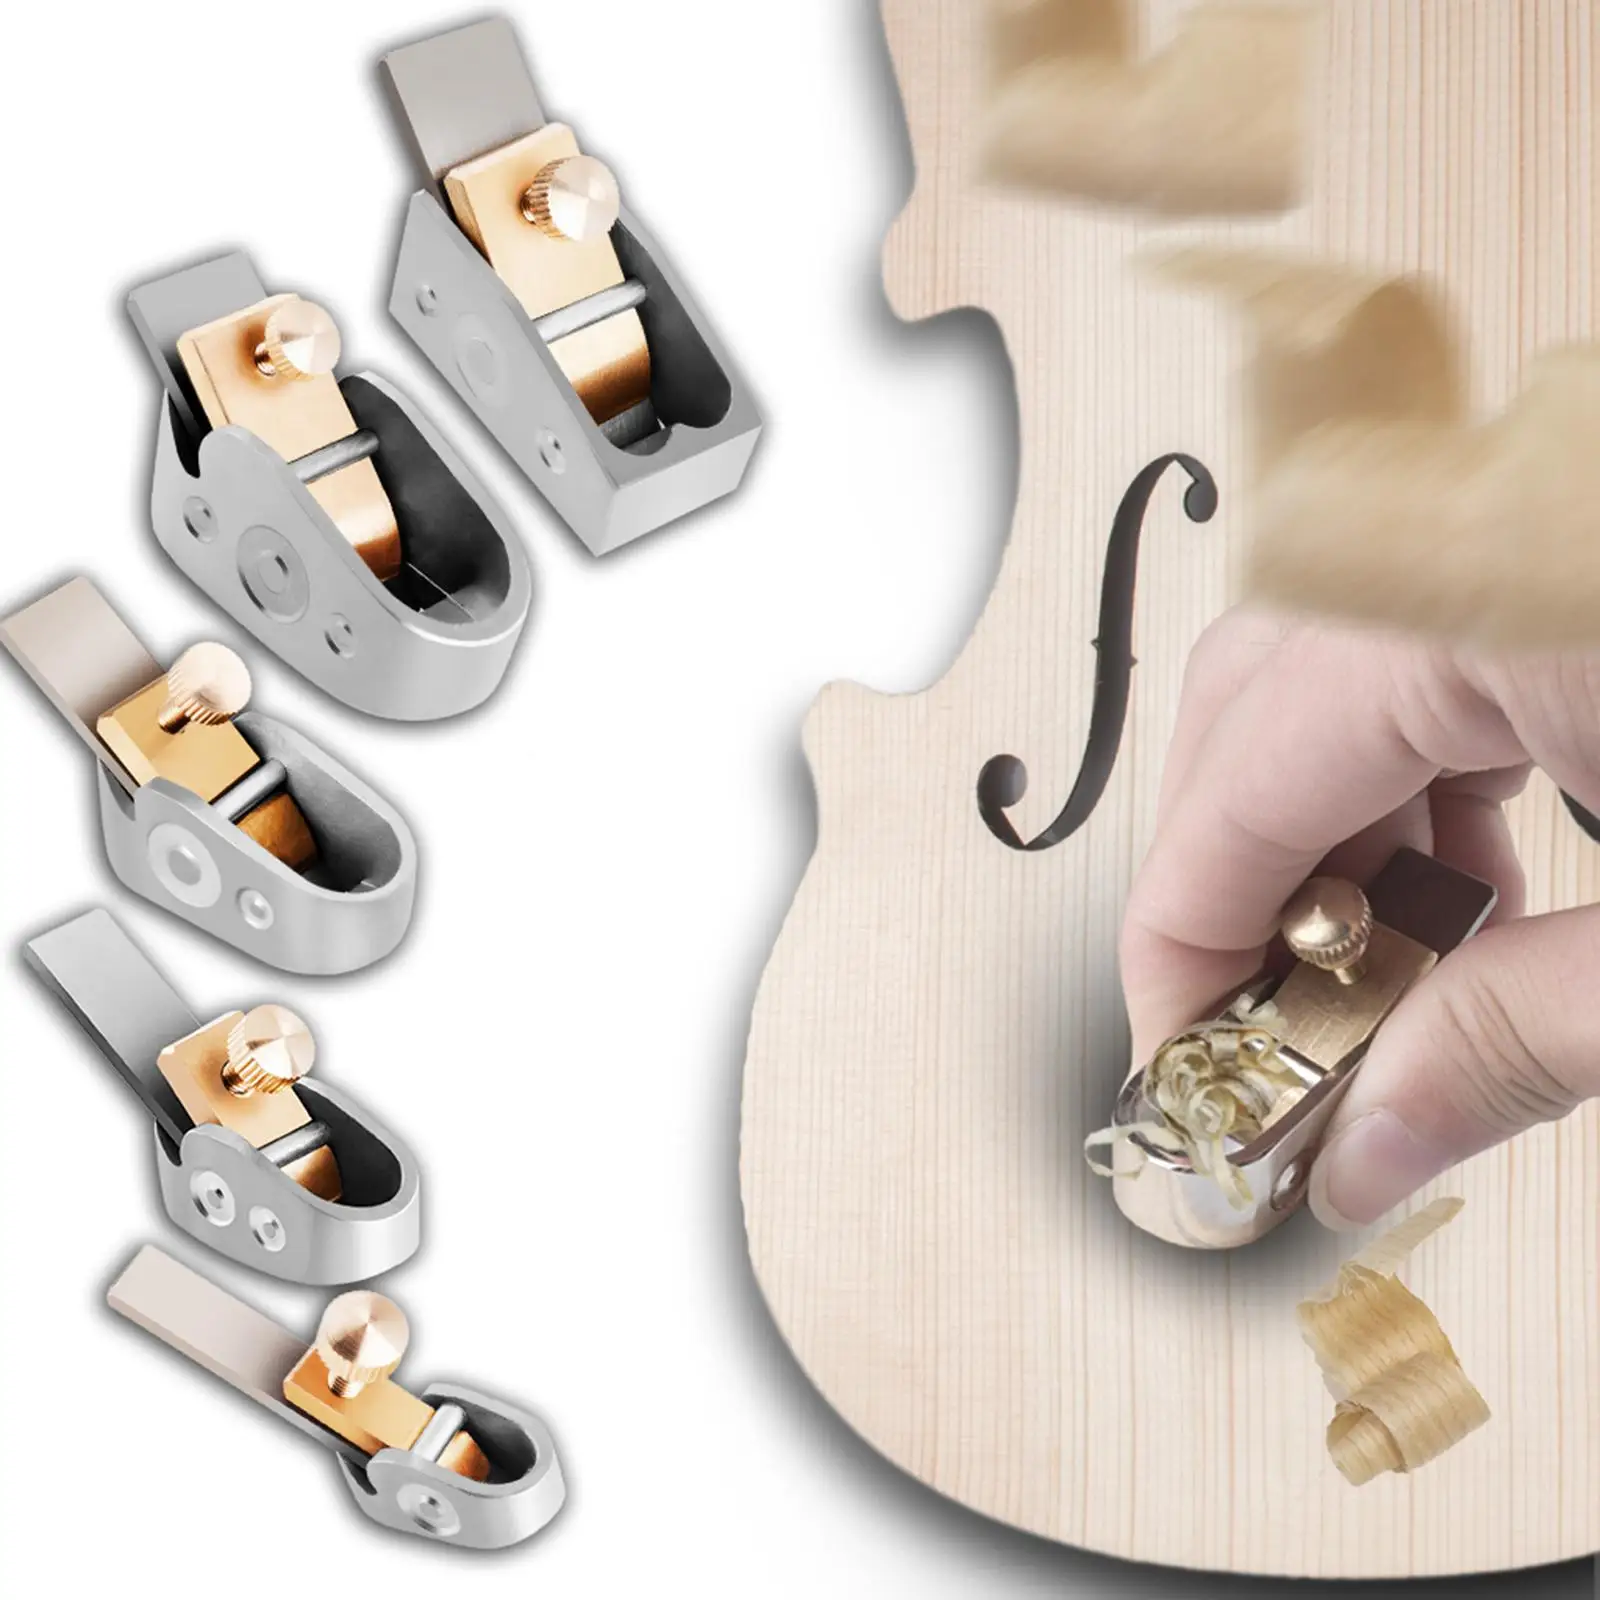 Professional Violin Thumb Planer Music Instrument Accesssory Thumb Plane Finger Planer for Trimming Wooden Instrument